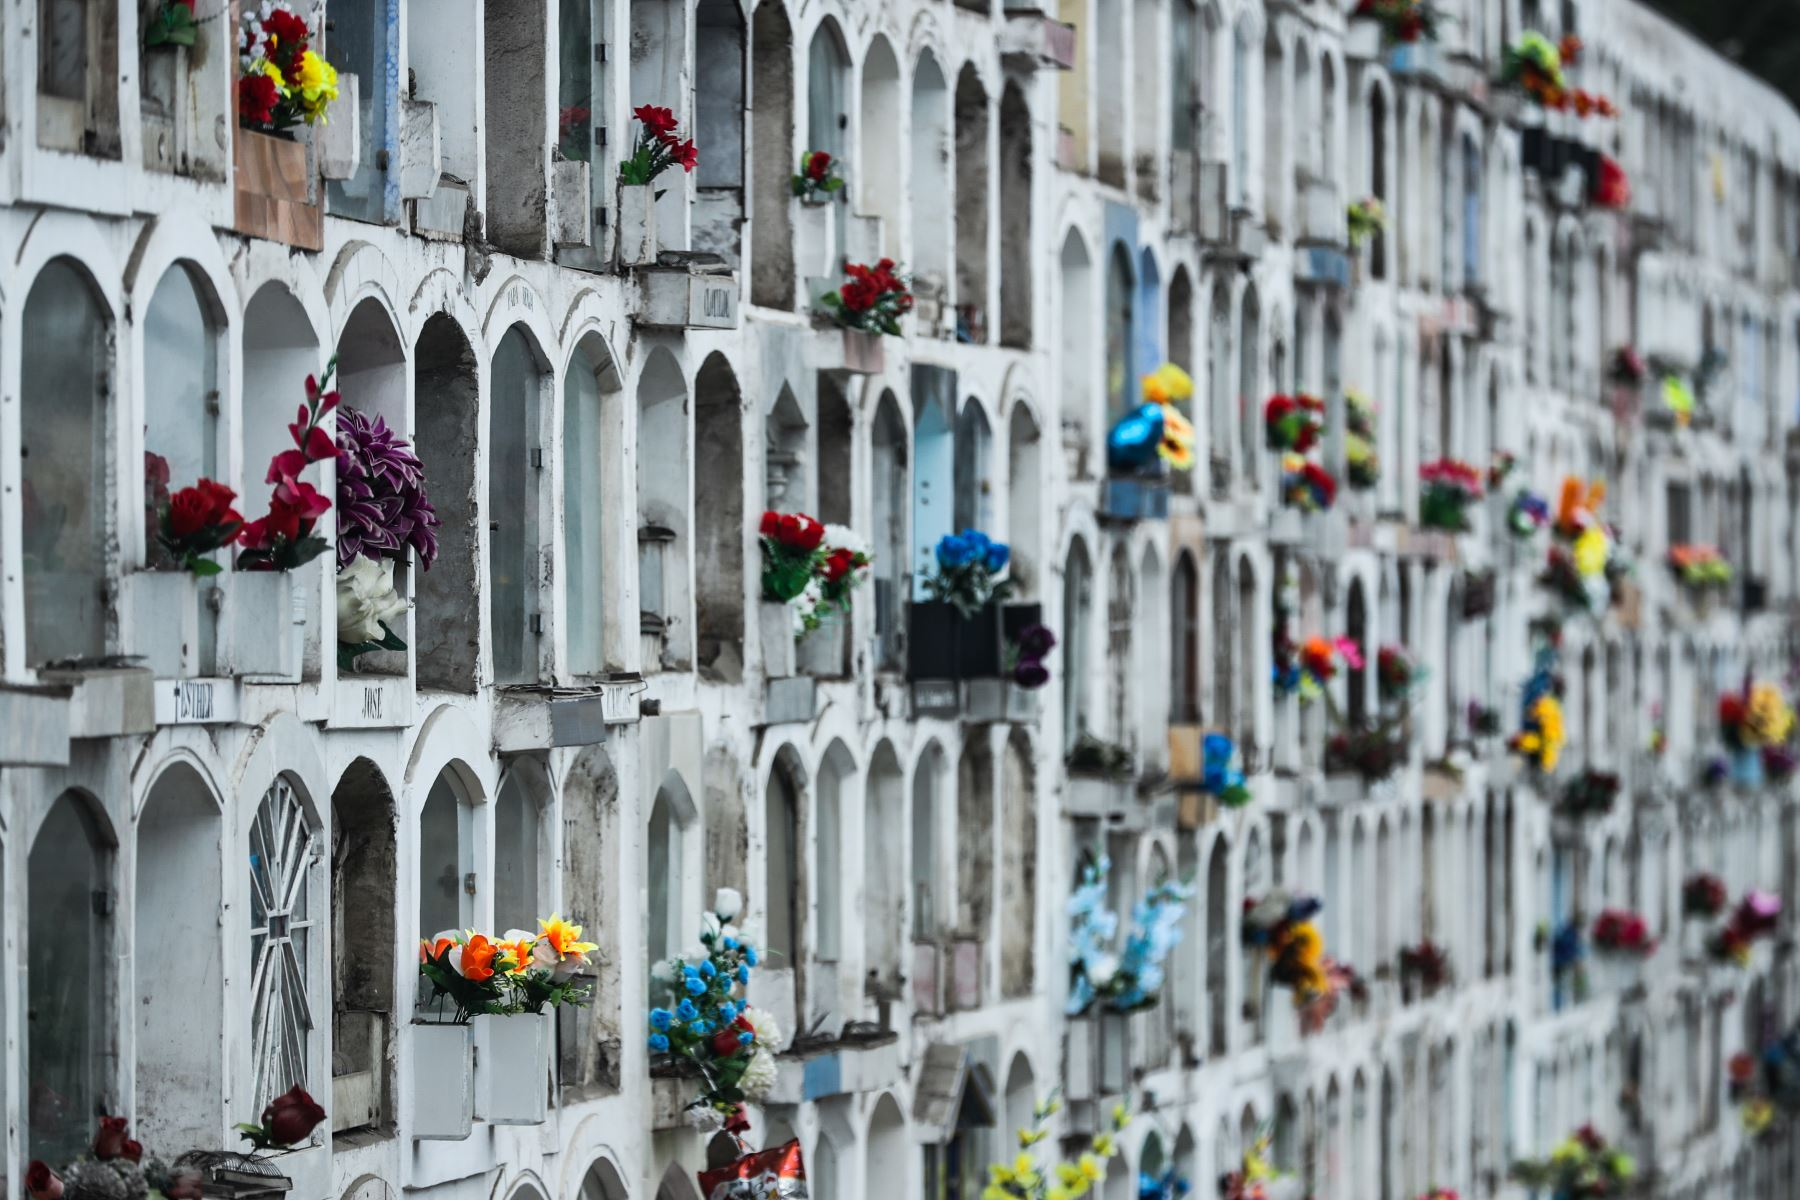 Public and private cemeteries must display prices for their funeral services